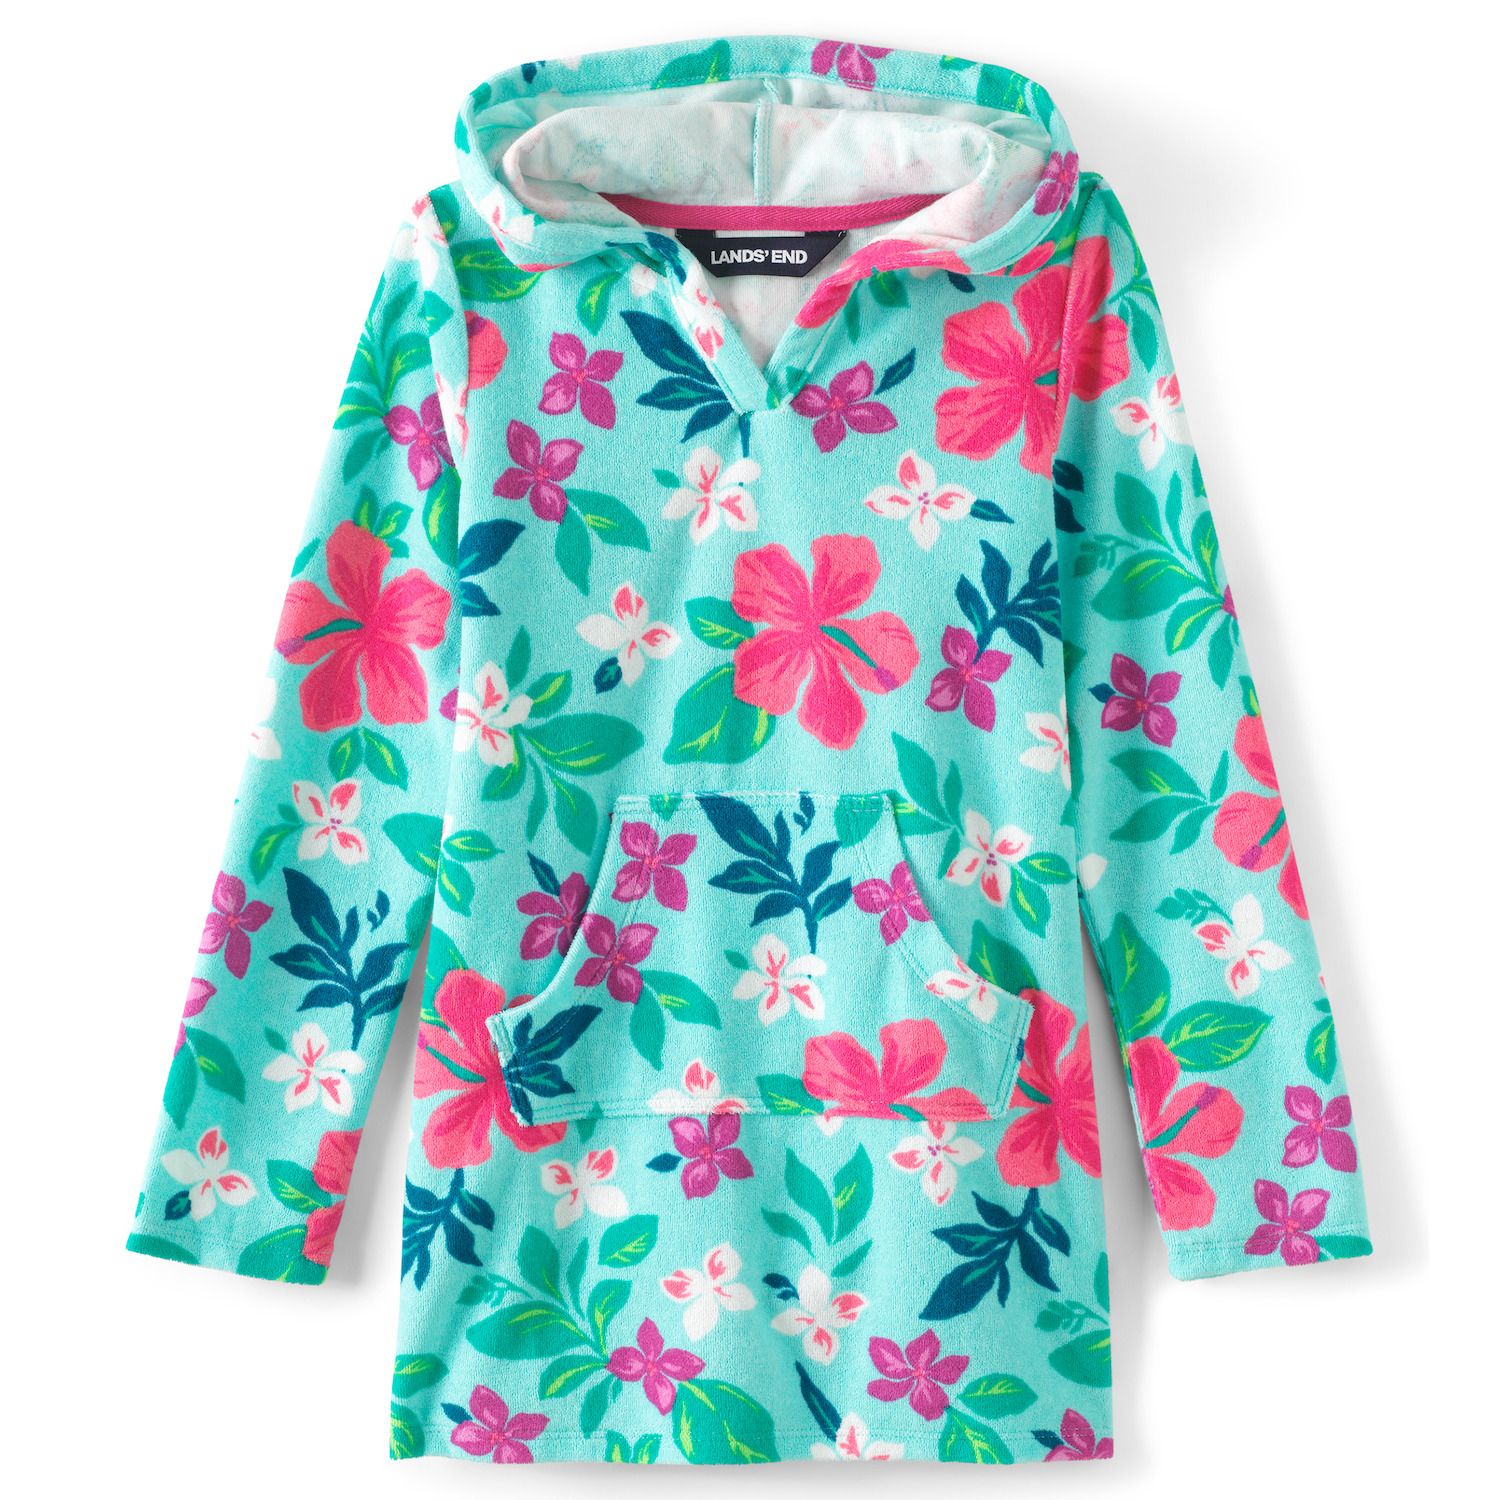 Image for Lands' End Girls 7-16 Hooded Swim Cover-up at Kohl's.